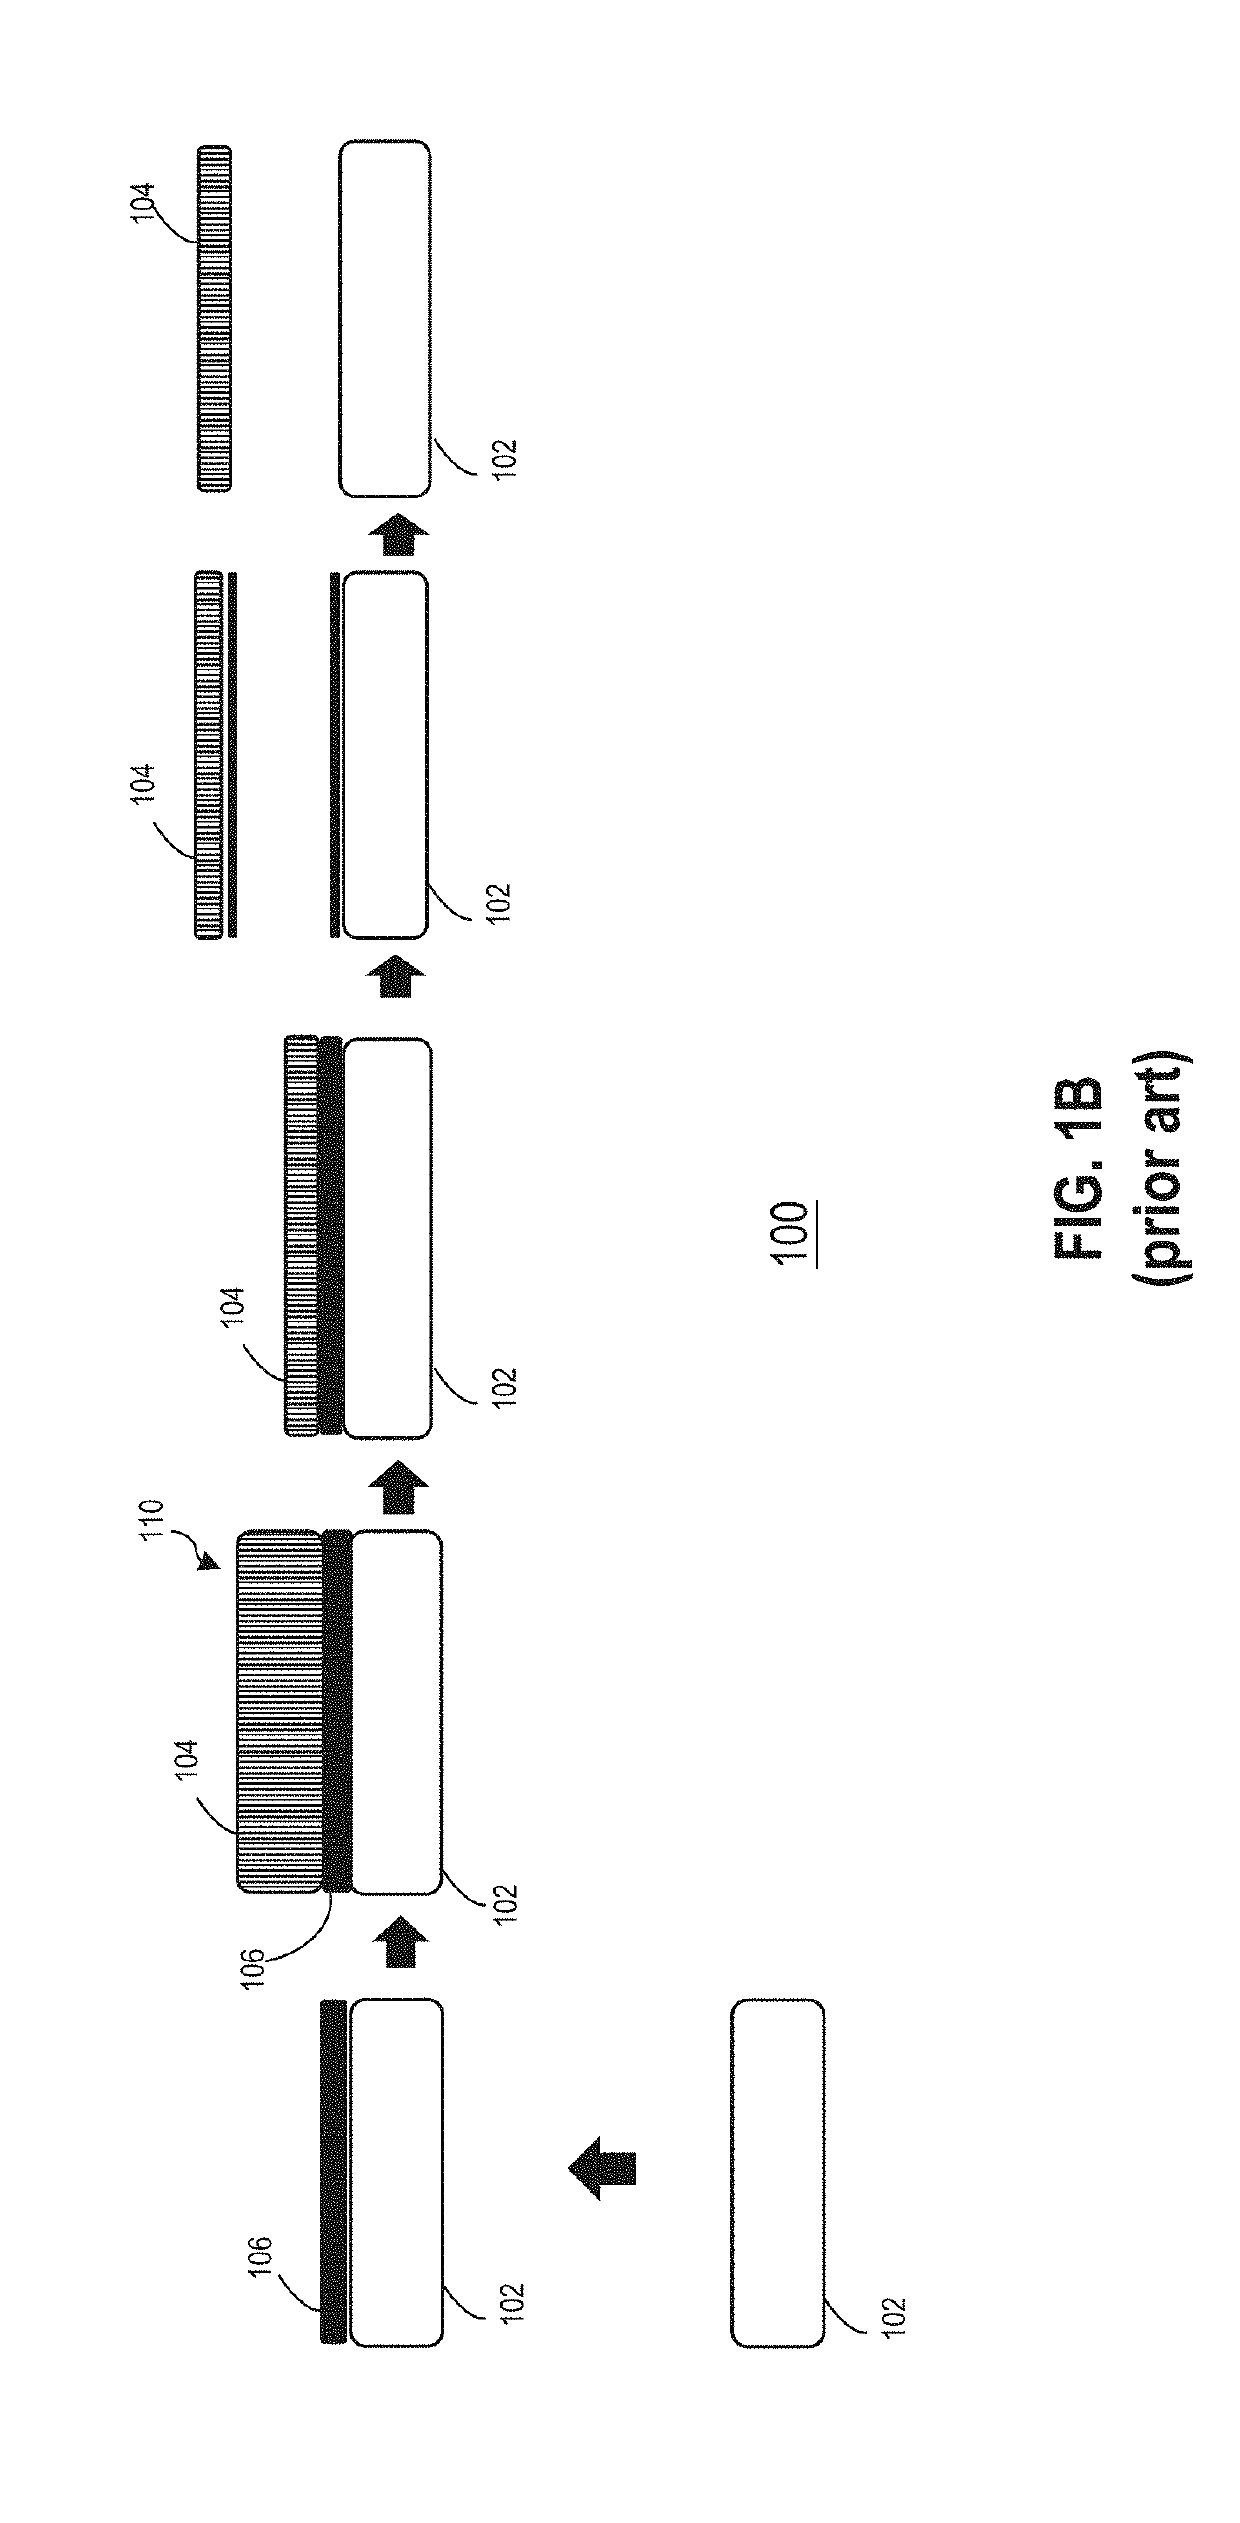 Method of debonding work-carrier pair with thin devices